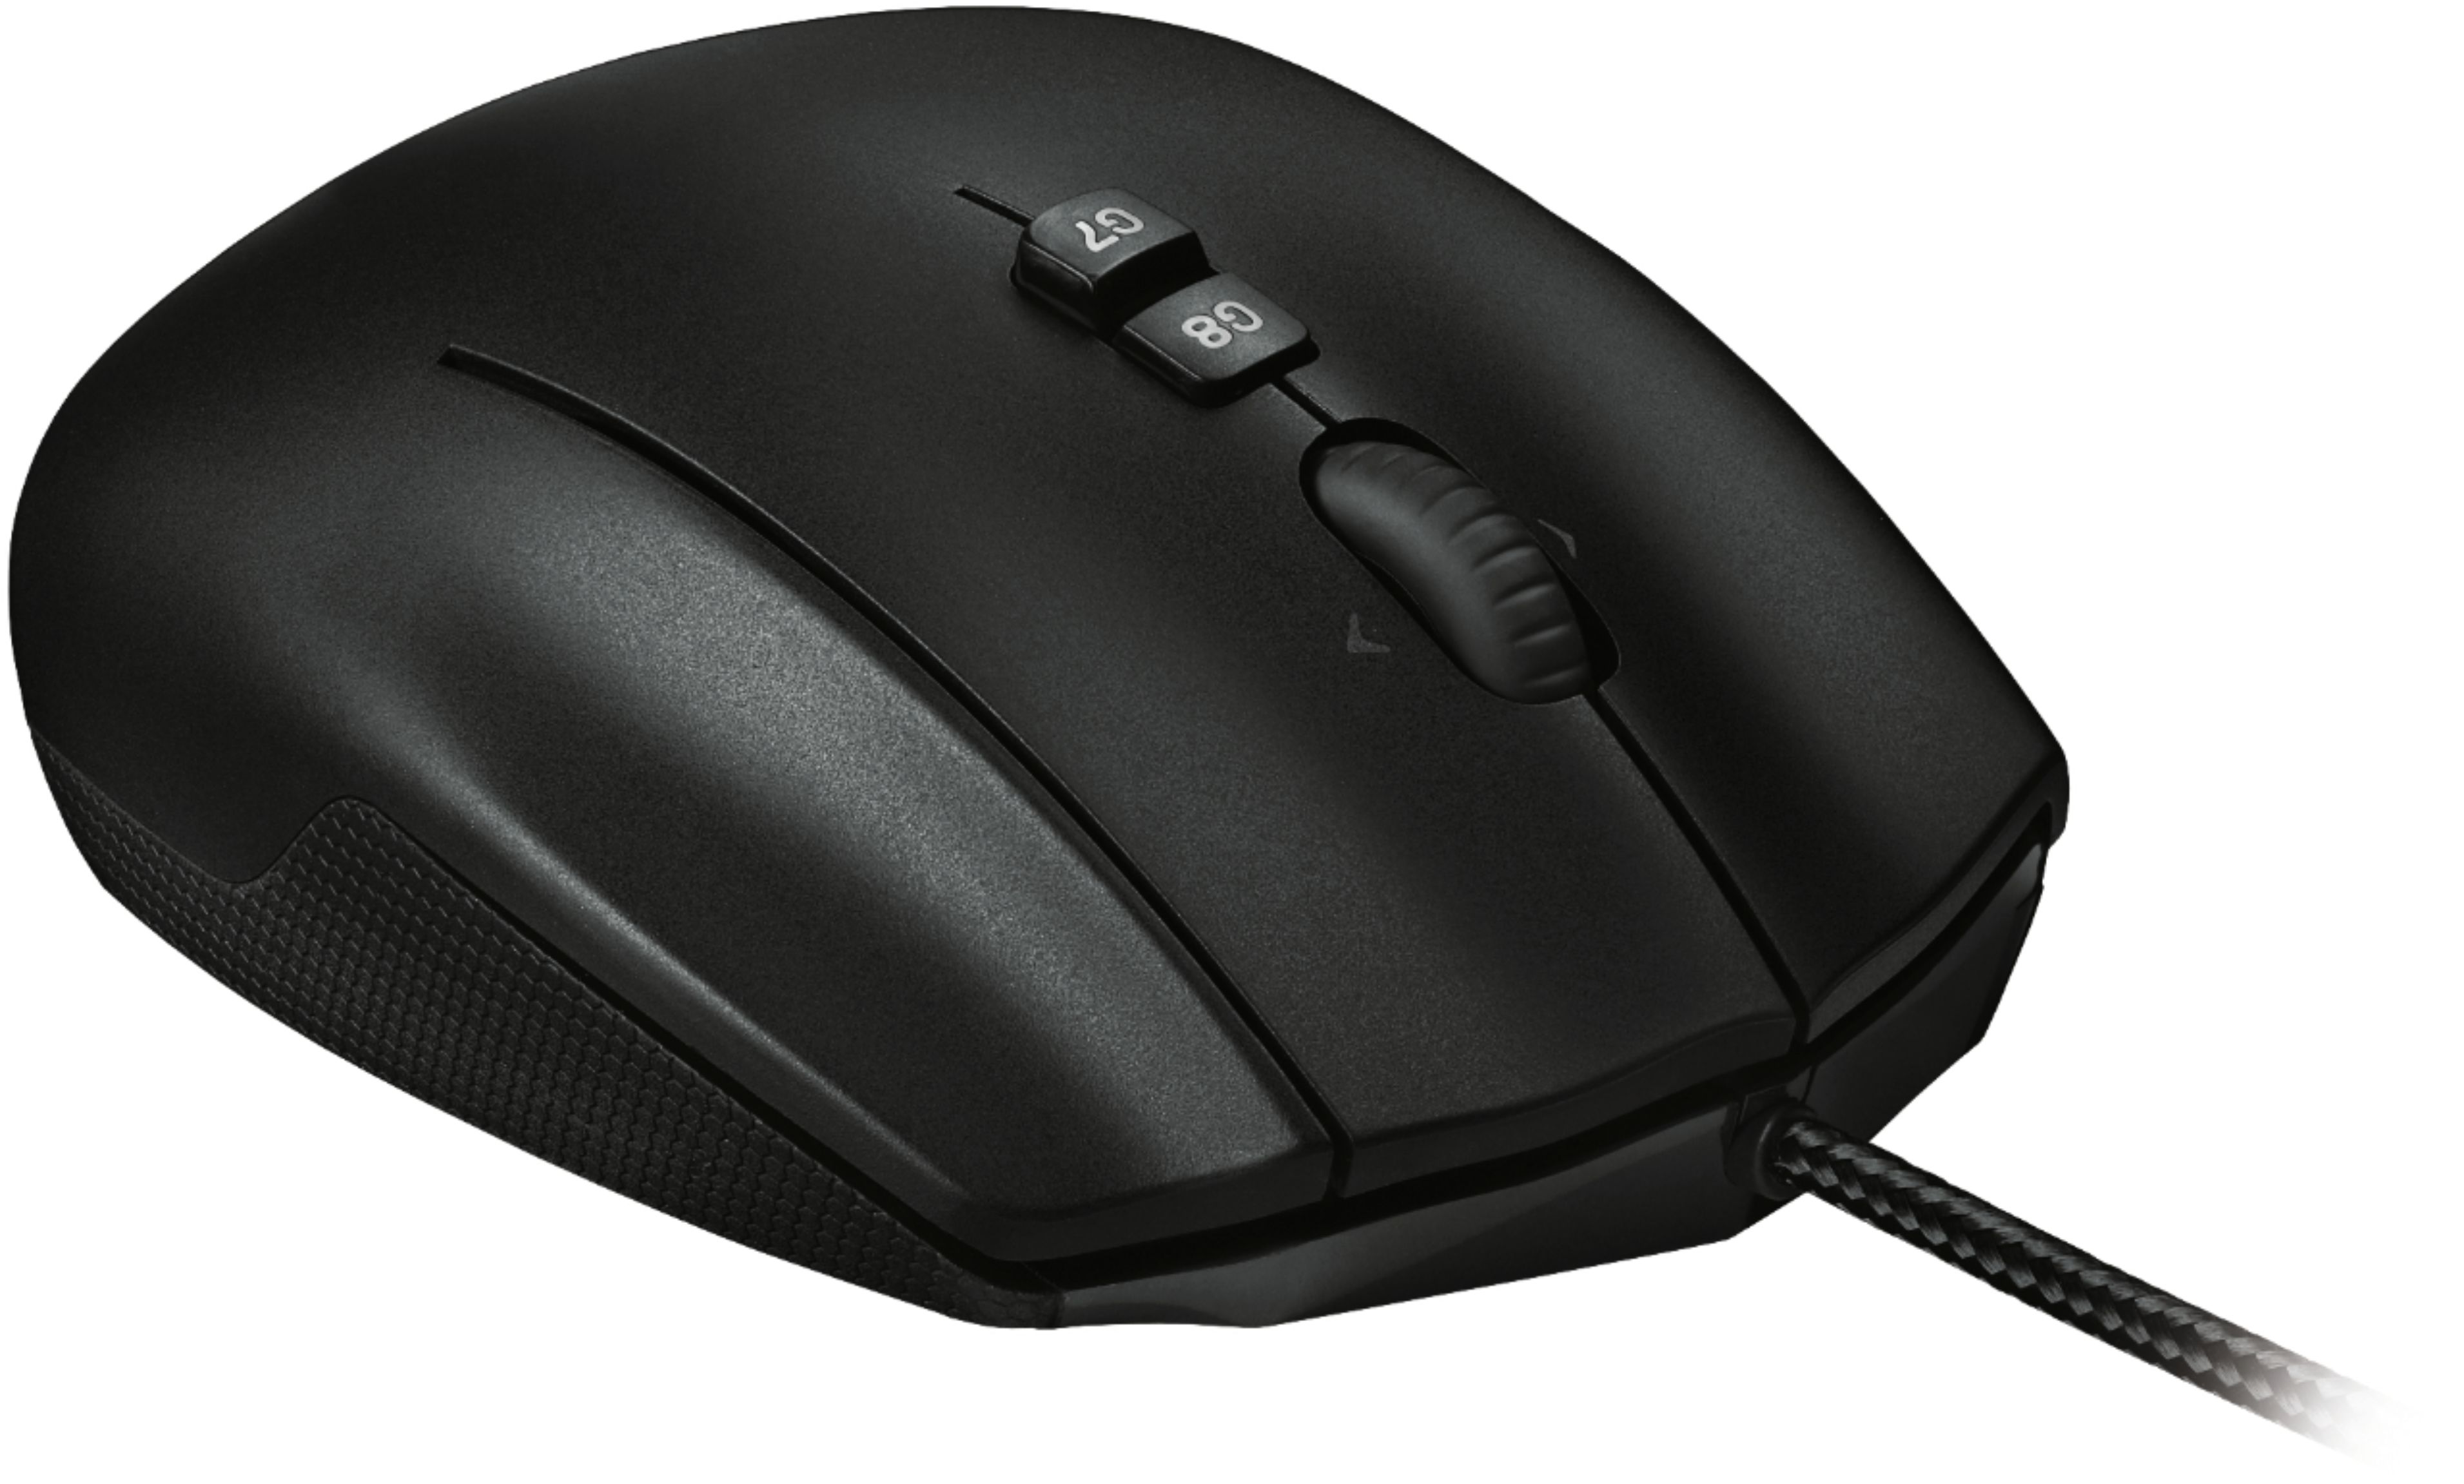 Logitech G600 MMO Wired Optical Gaming Mouse Black 910-002864 - Best Buy